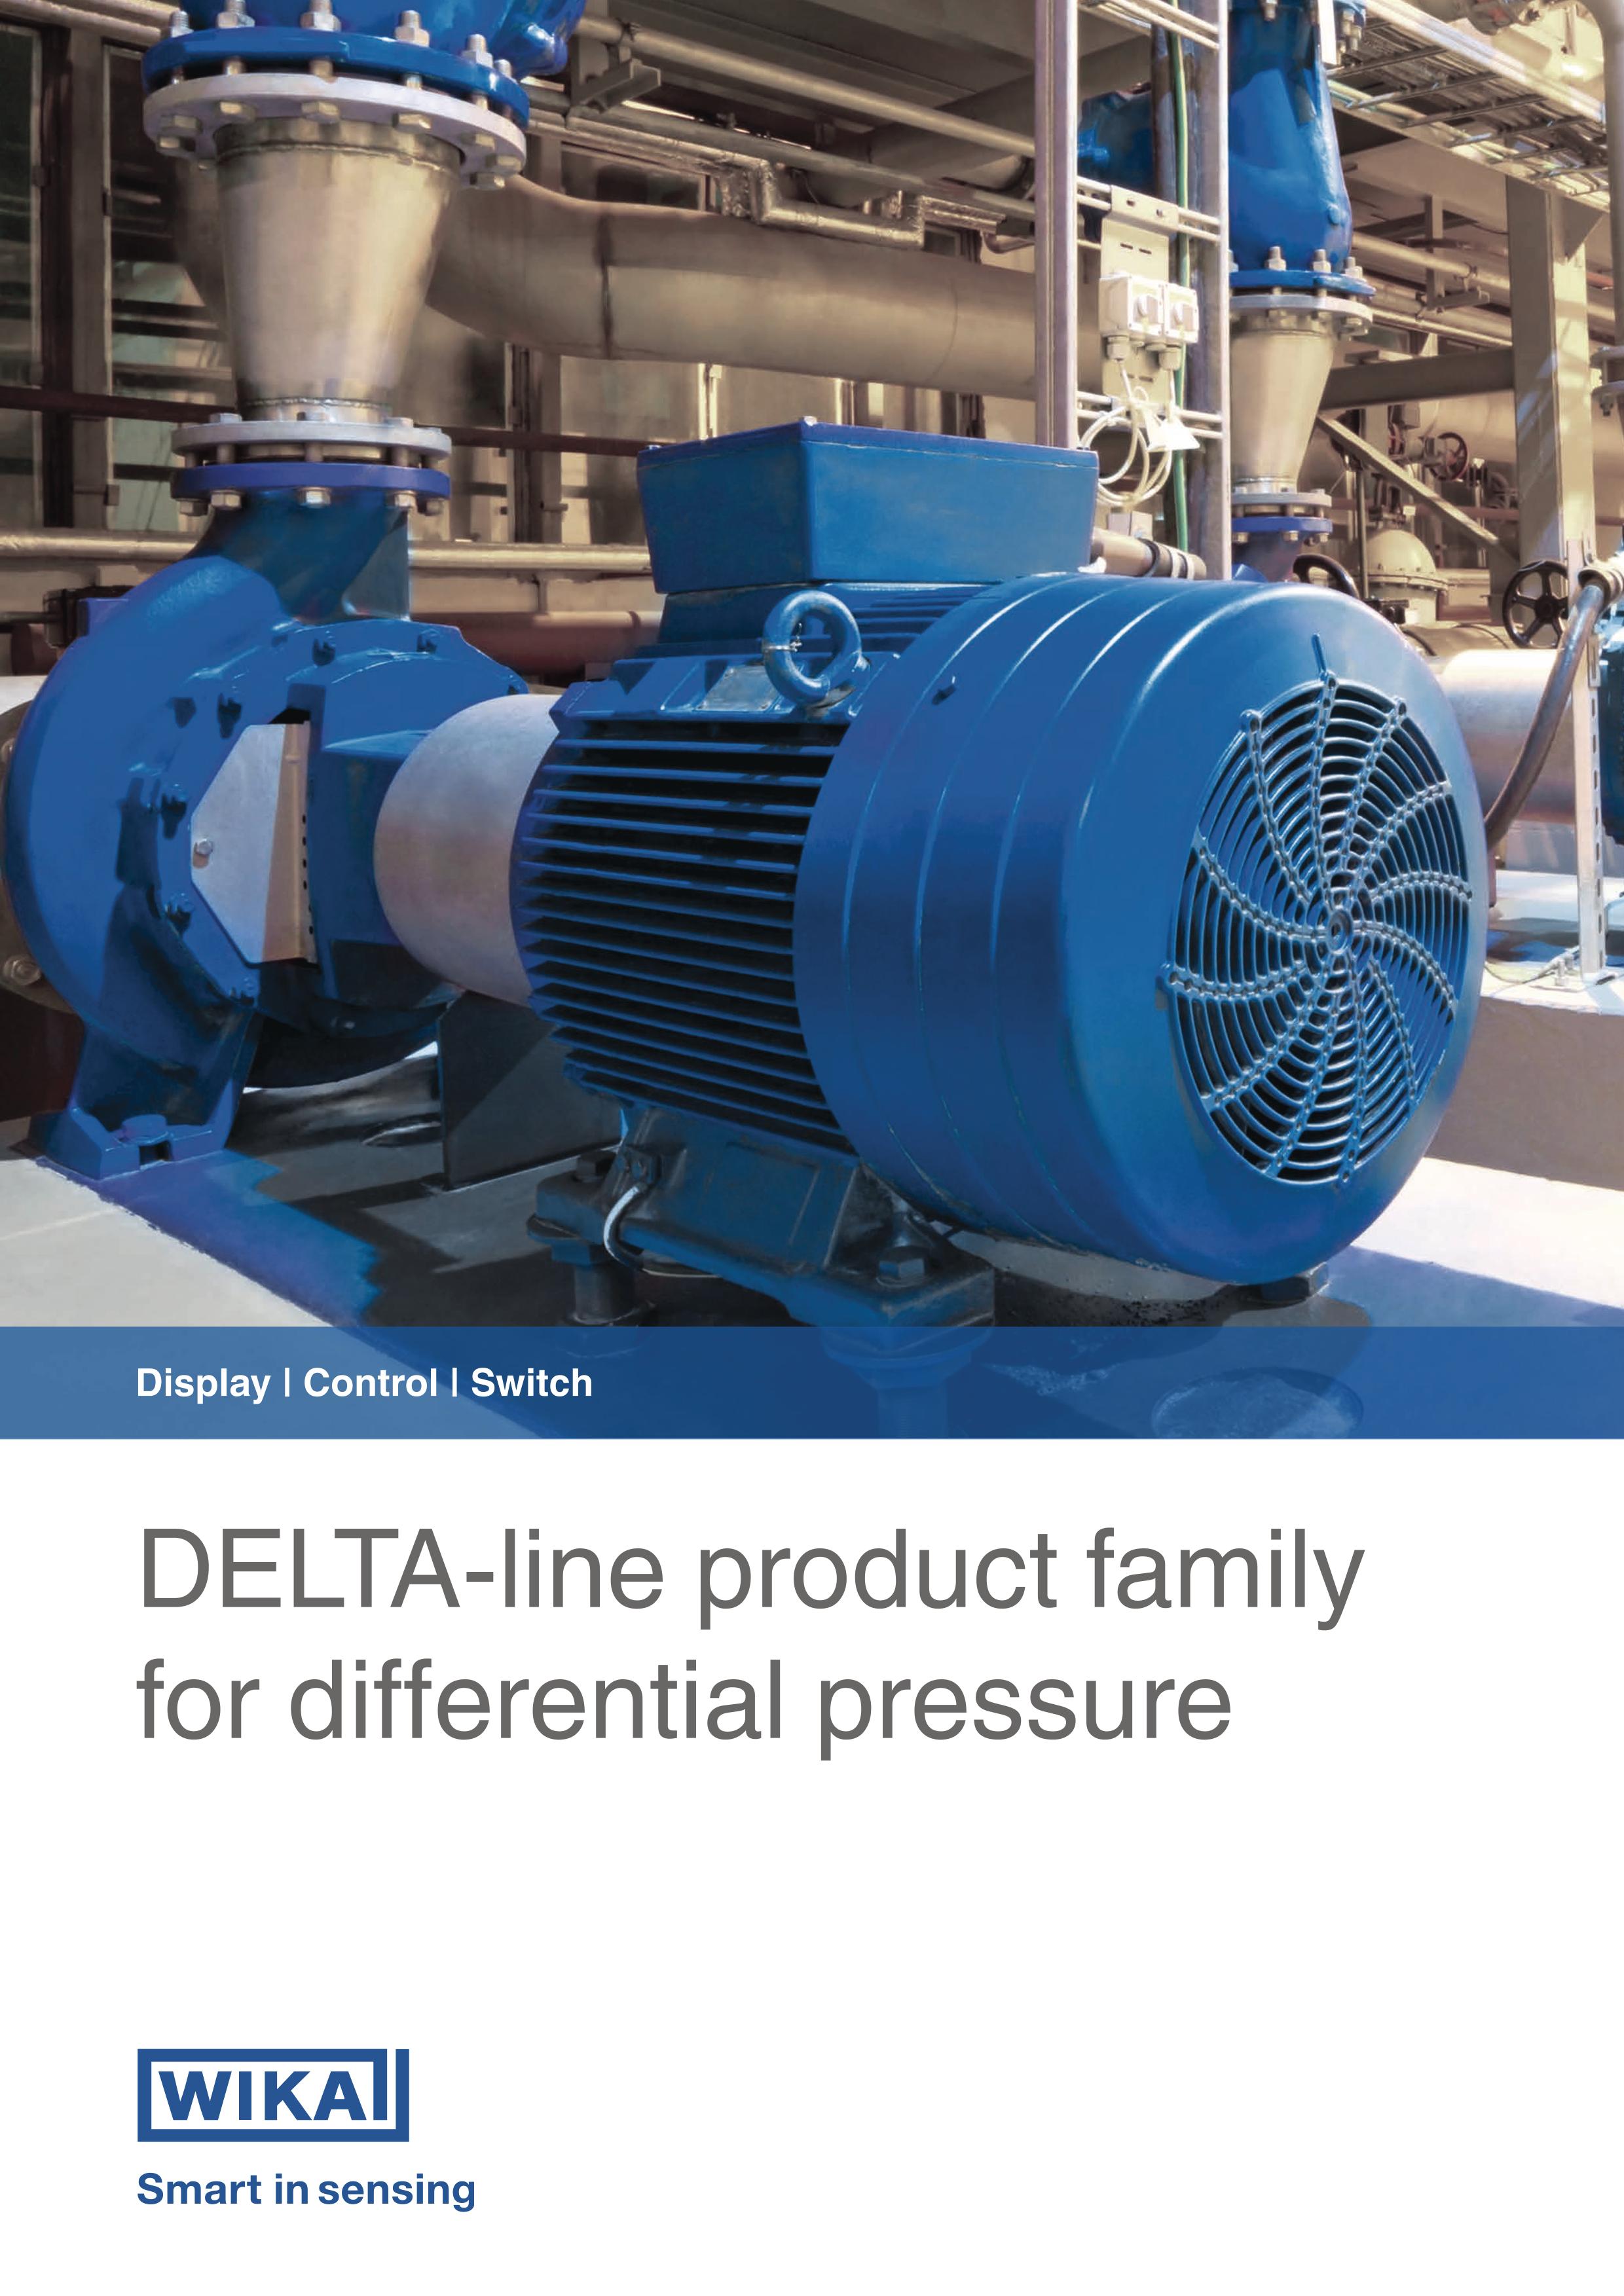 Product family DELTA-line for differential pressure measurement